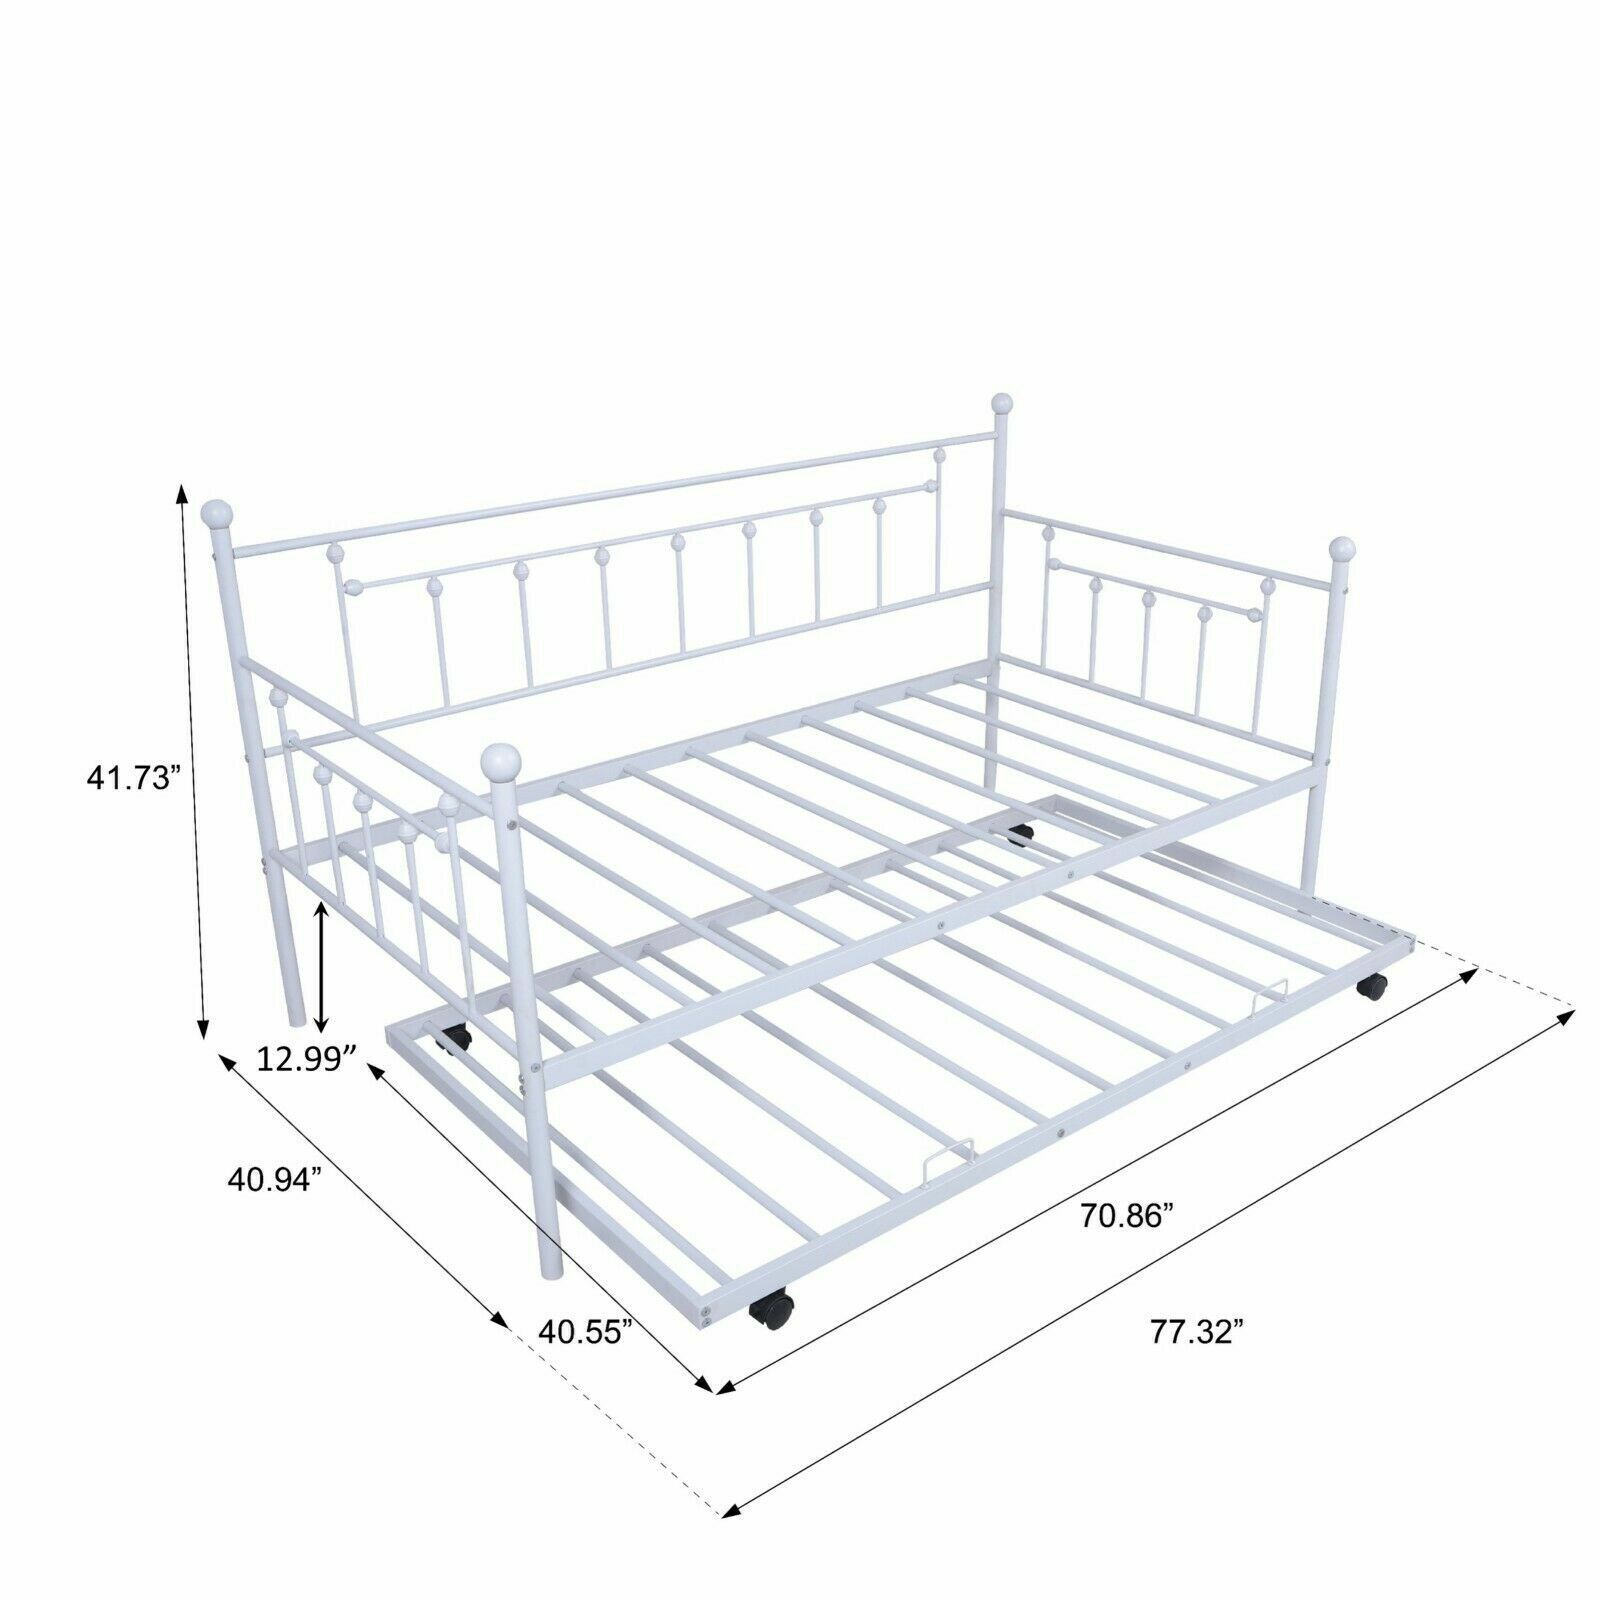 Metal Frame Daybed with Trundle Bedroom Furniture Space Saving For Kids Adults Fetines Does Not Apply - фотография #3